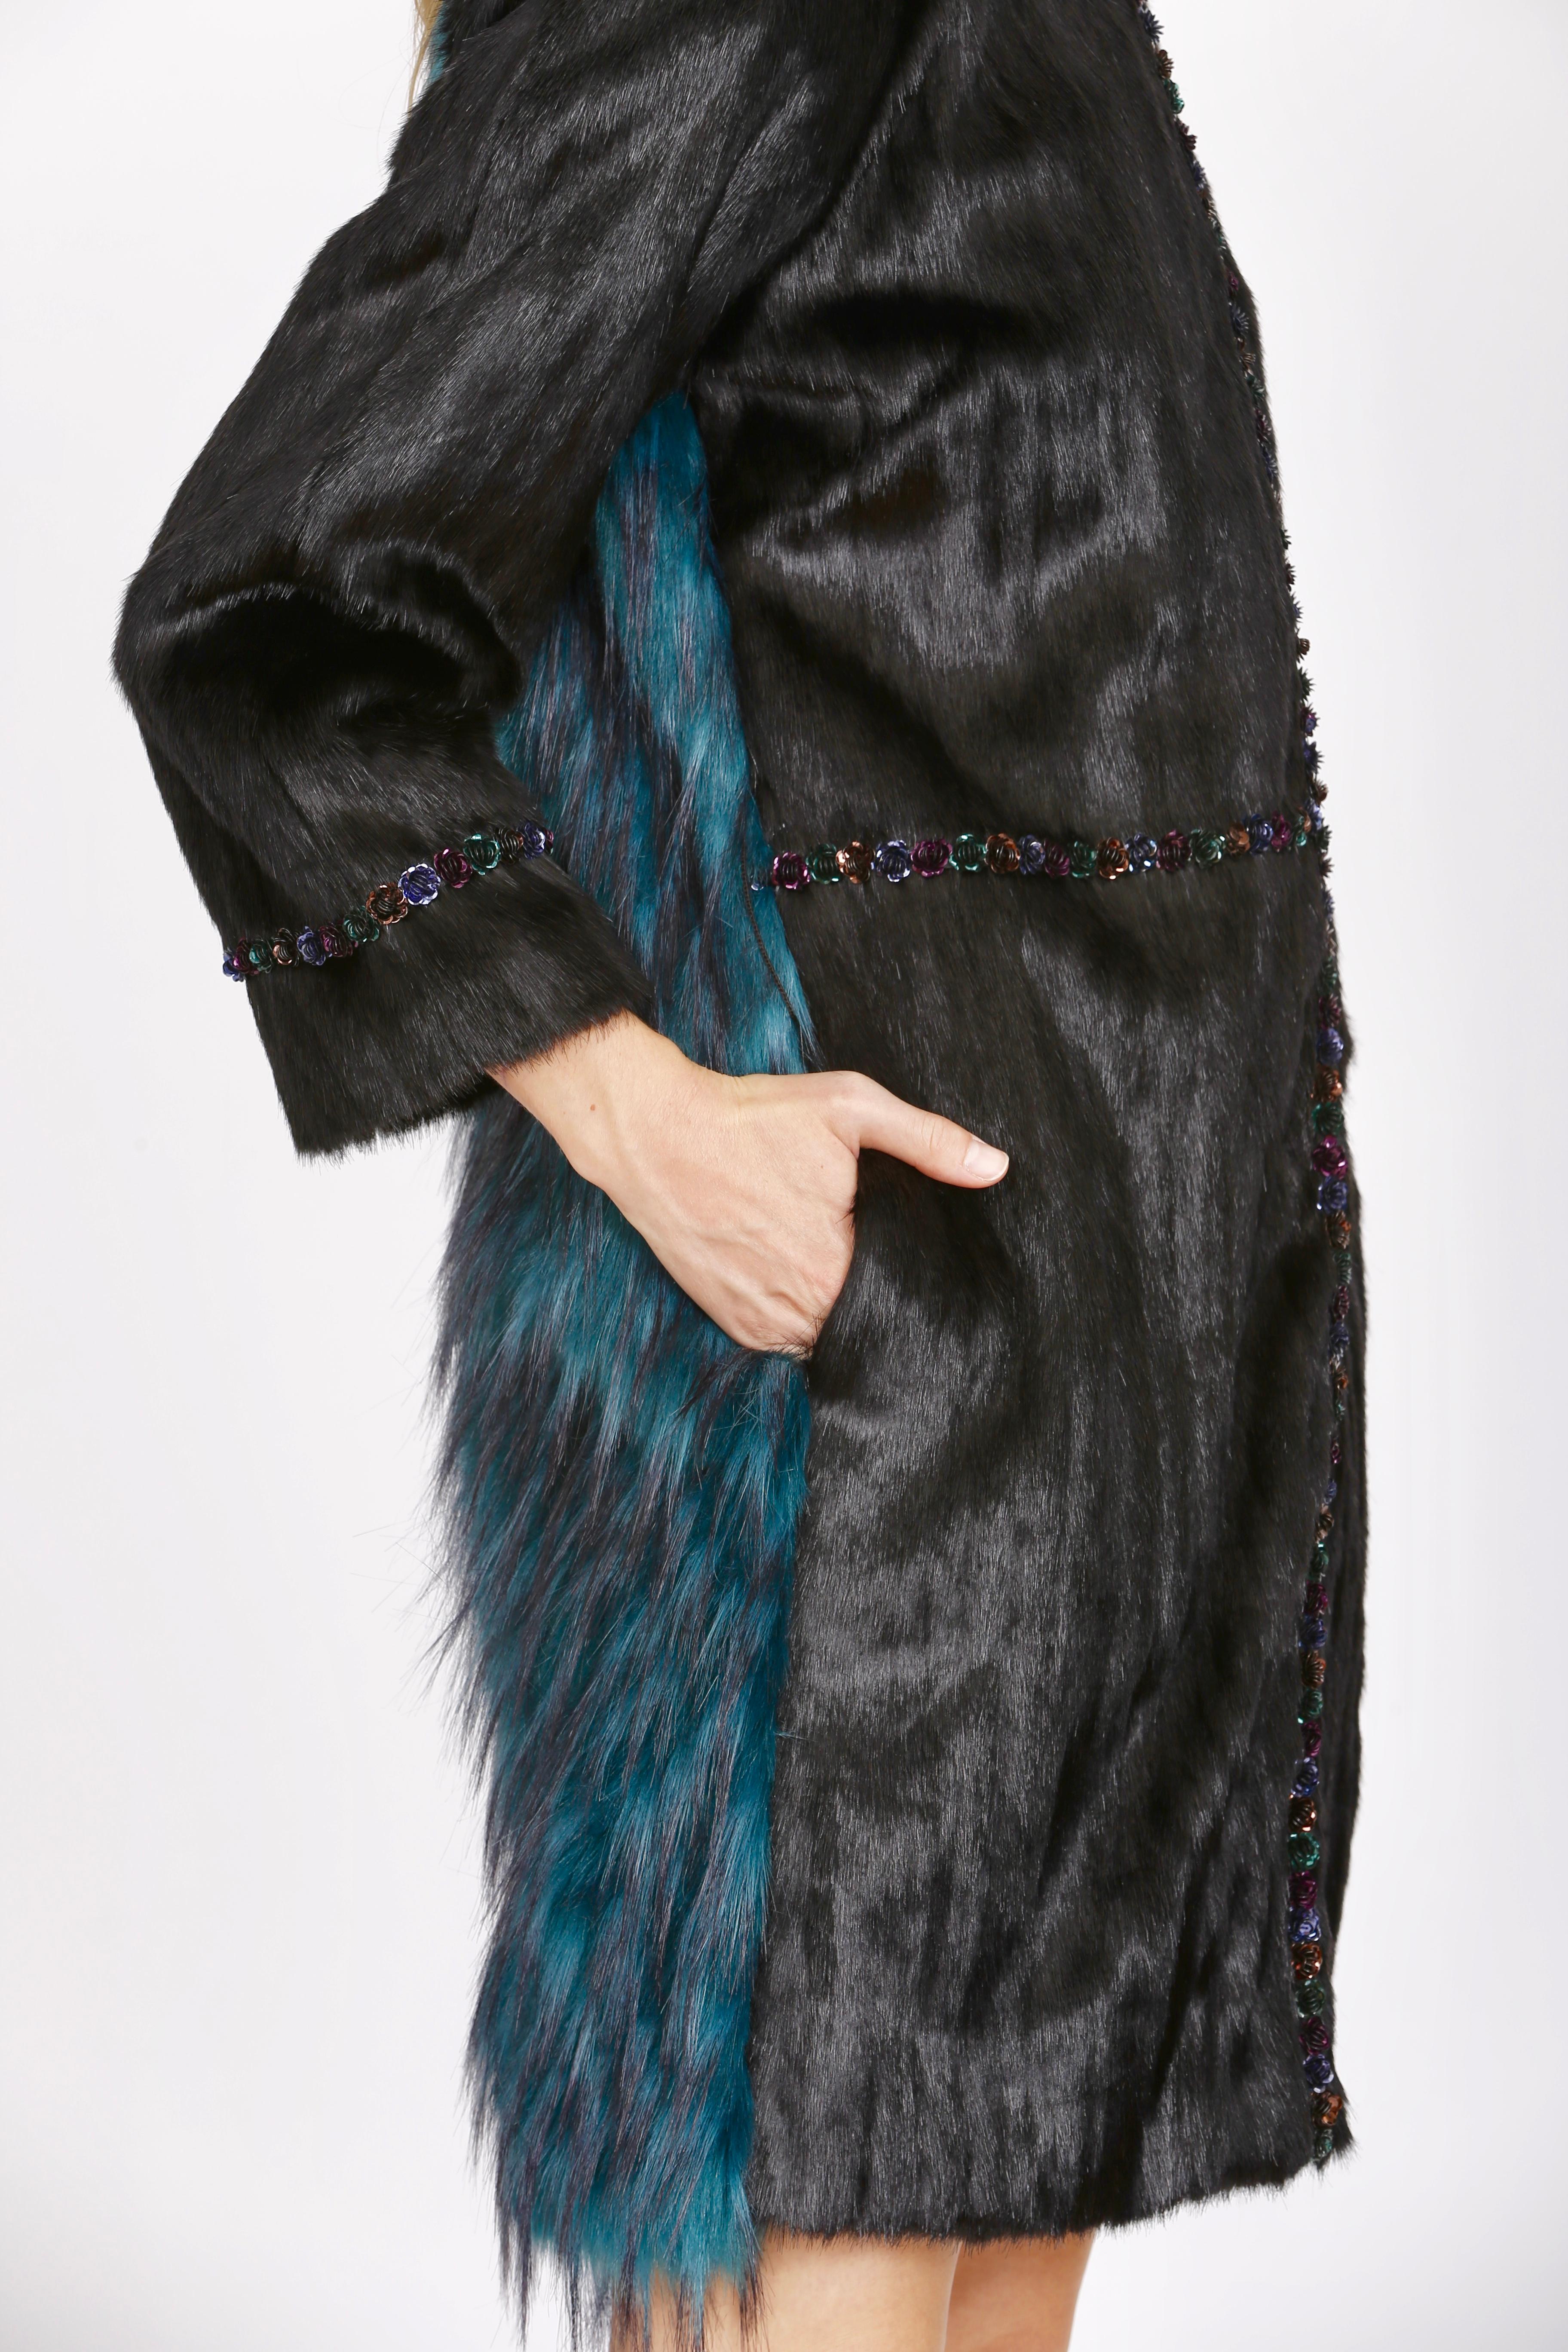 The Jade Pelush black and emerald green faux fur coat is a one of a kind exclusive piece. Featuring the best man made pelage, this stylish bi-color winter coat is a beautiful replica of the mink and fox fur. The two different textures are in perfect